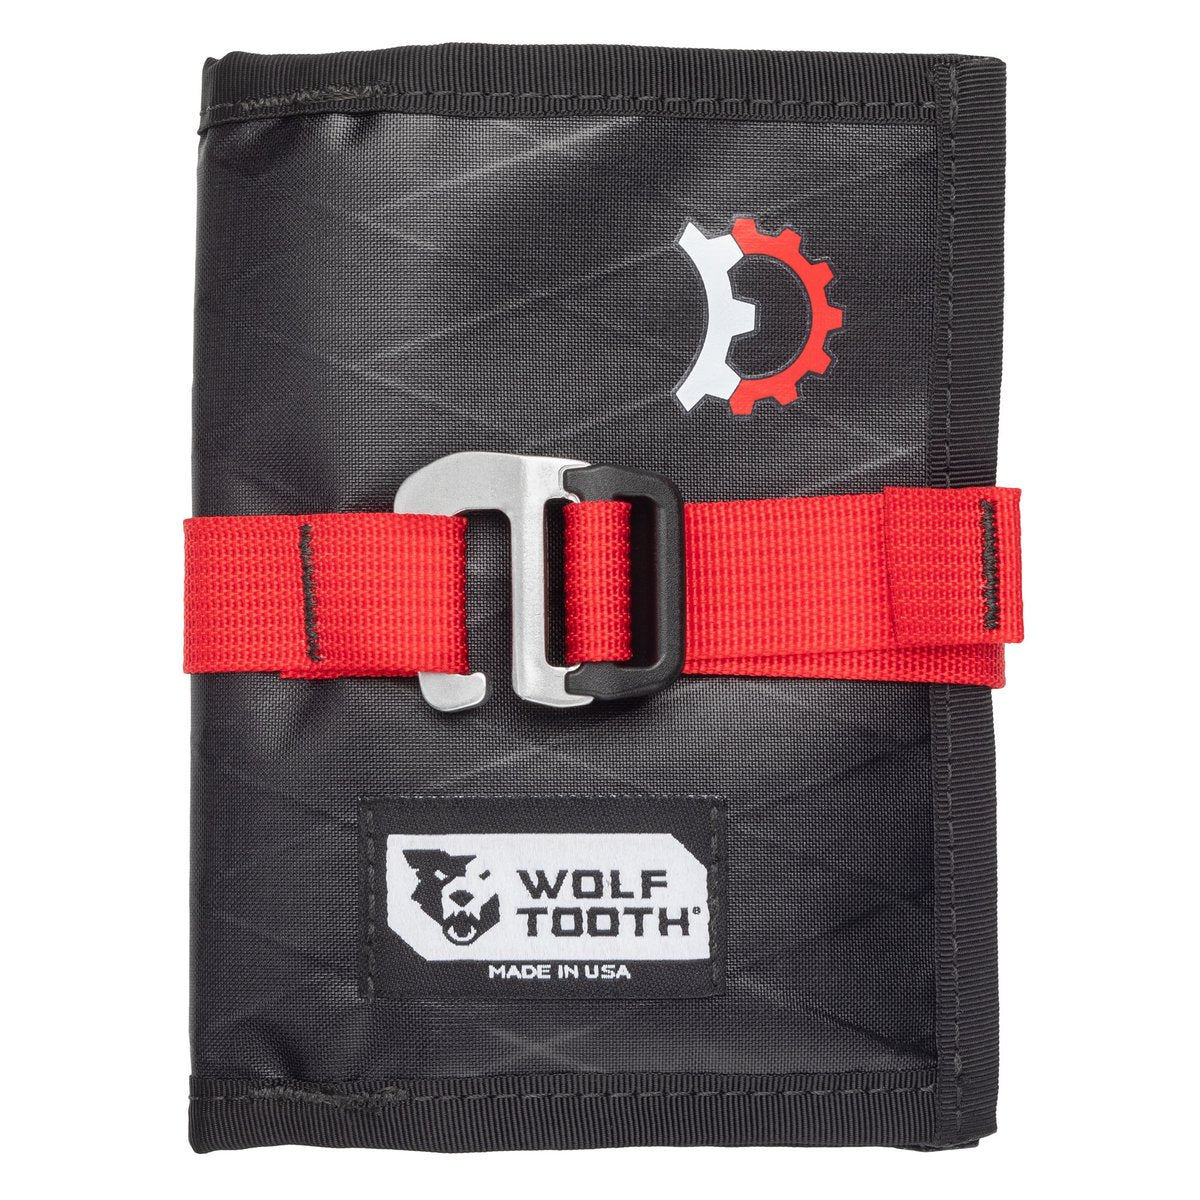 Revelate Designs + Wolf Tooth ToolCash Wallet - RideCX cyclocross store